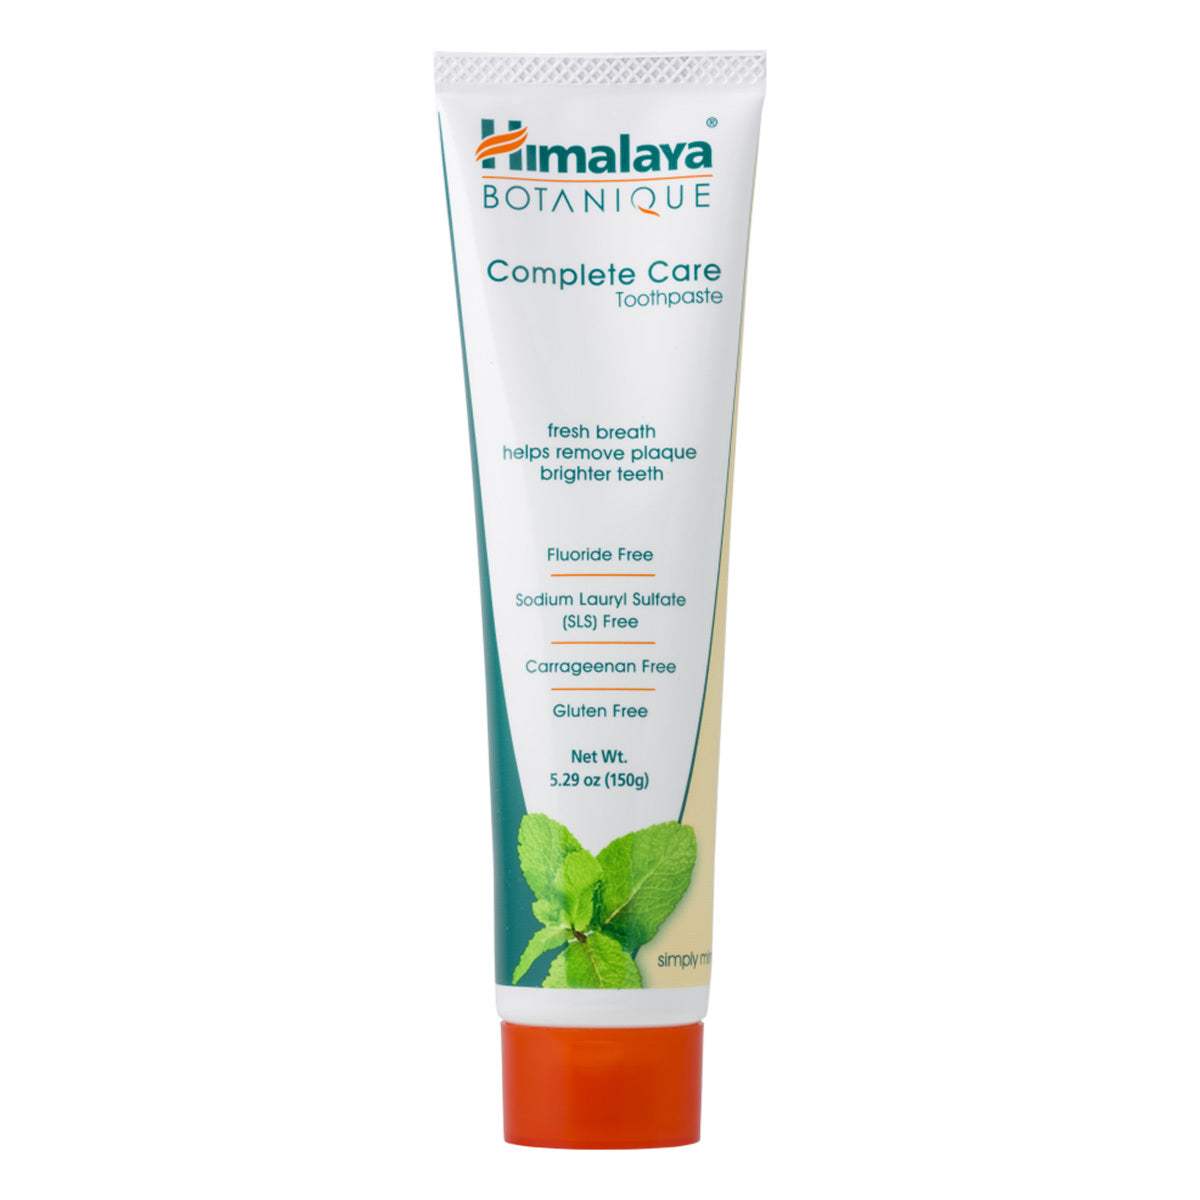 Primary image of Complete Care Simply Mint Toothpaste